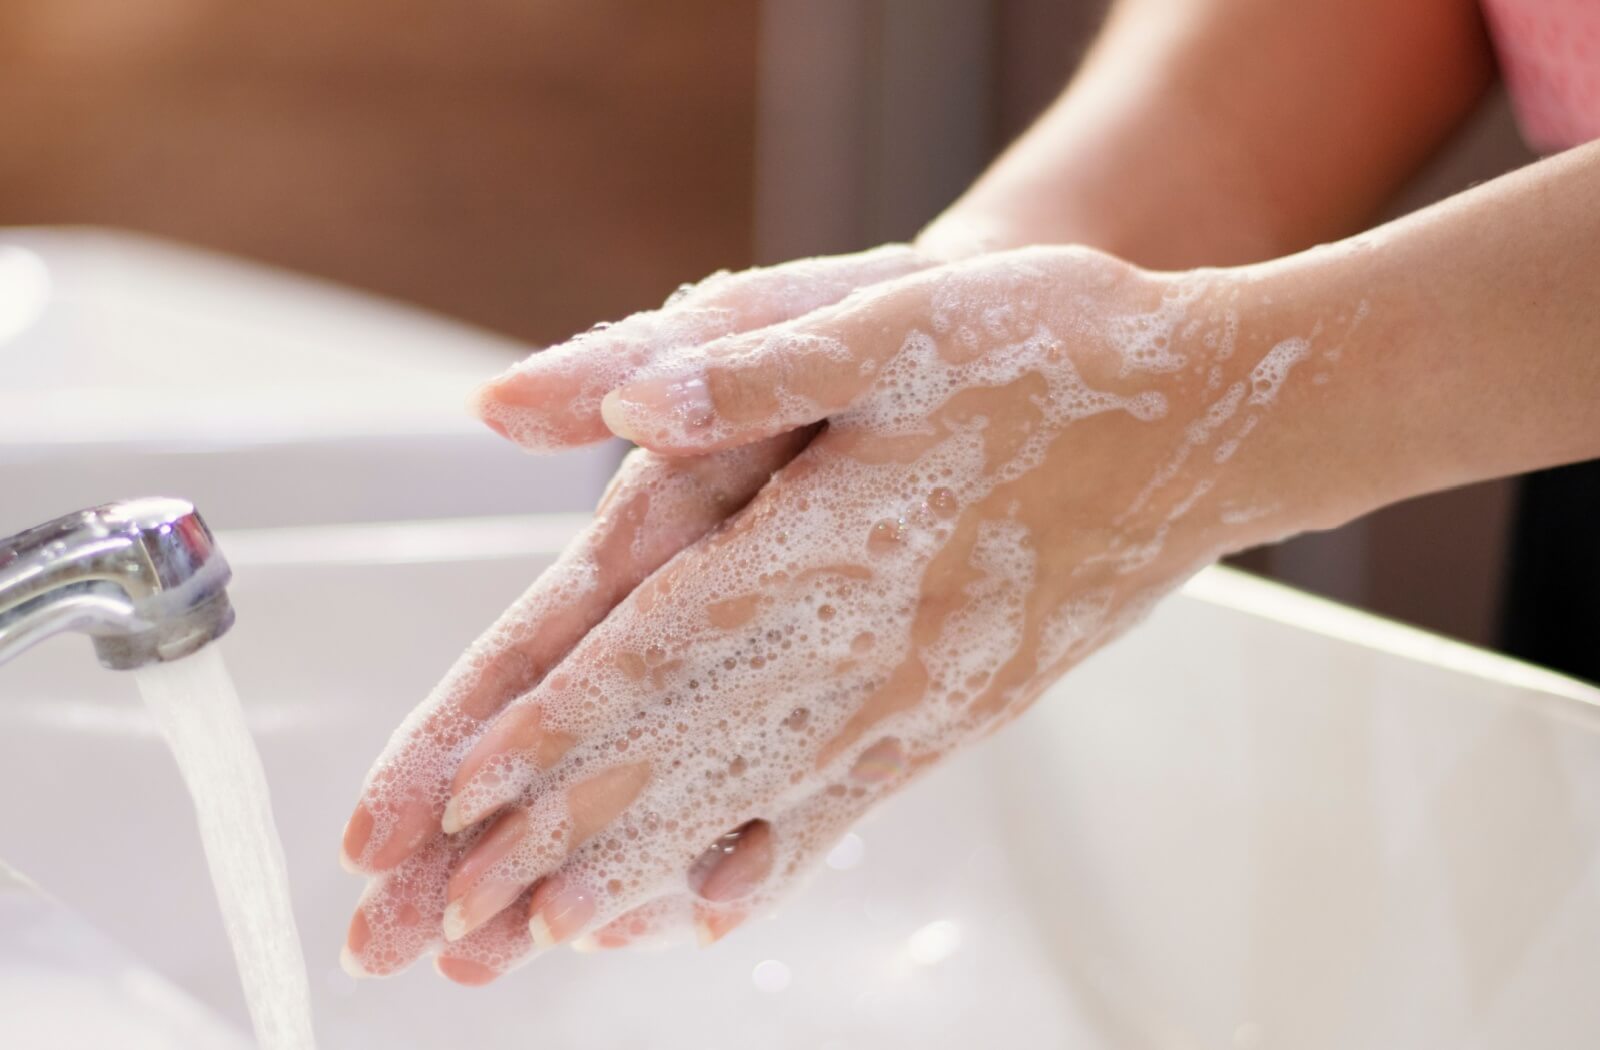 A close-up of a person's hands lathered with soap.